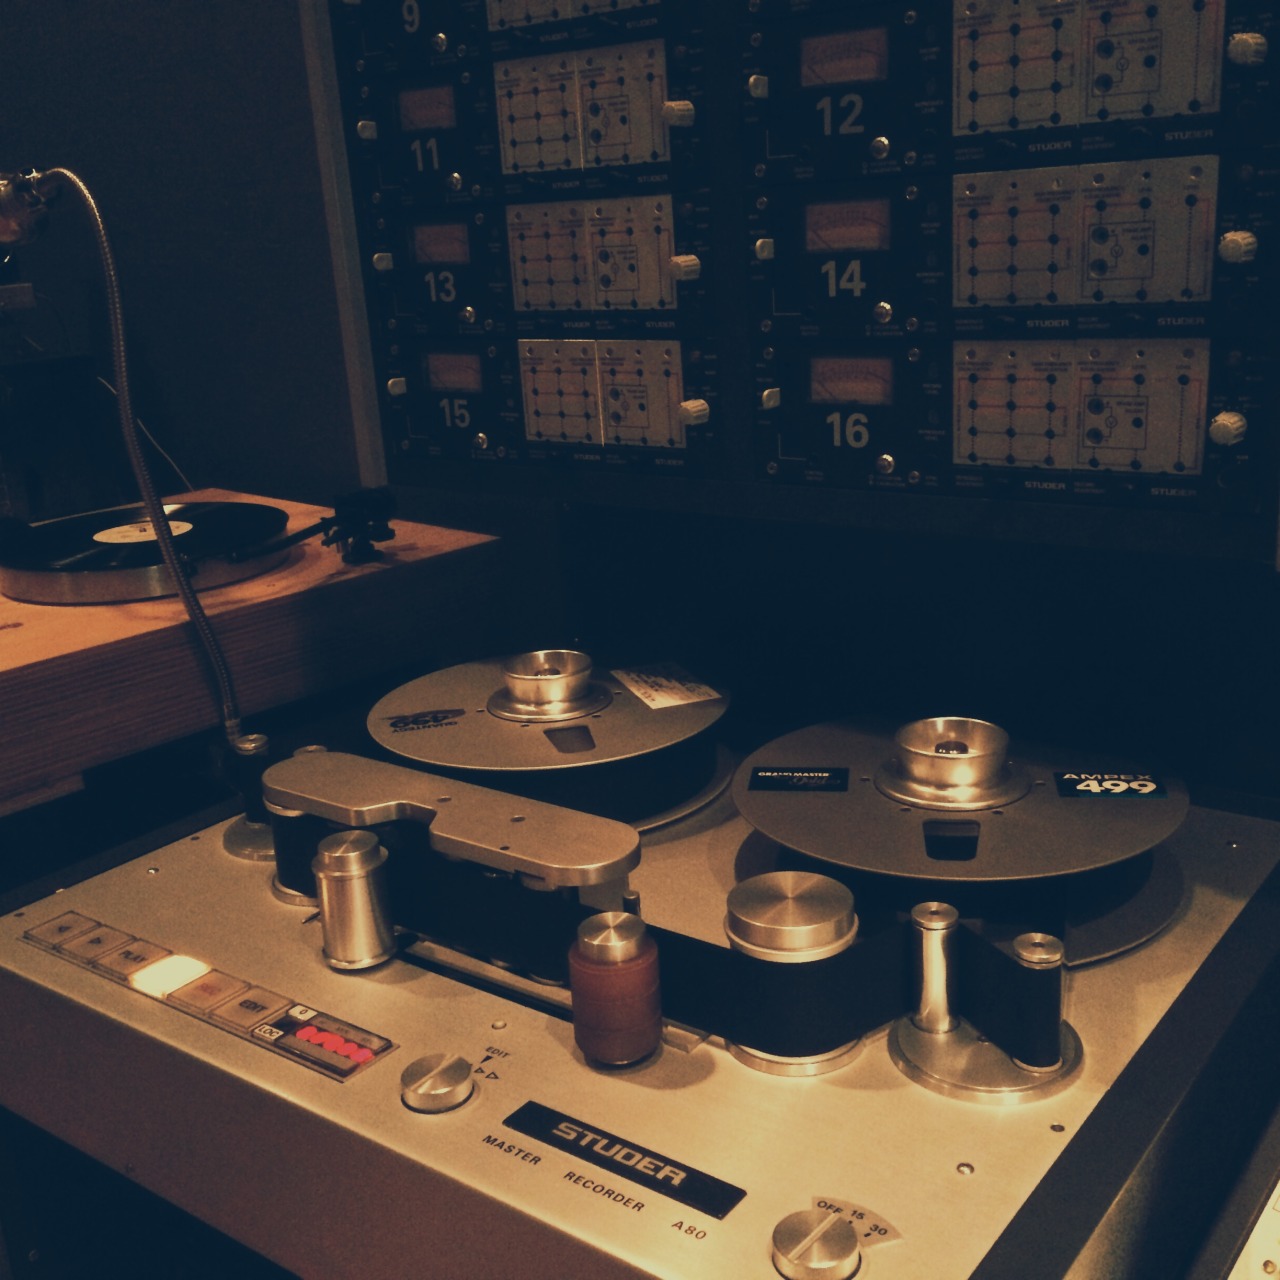 Mixing with the Studer today.
No, really.